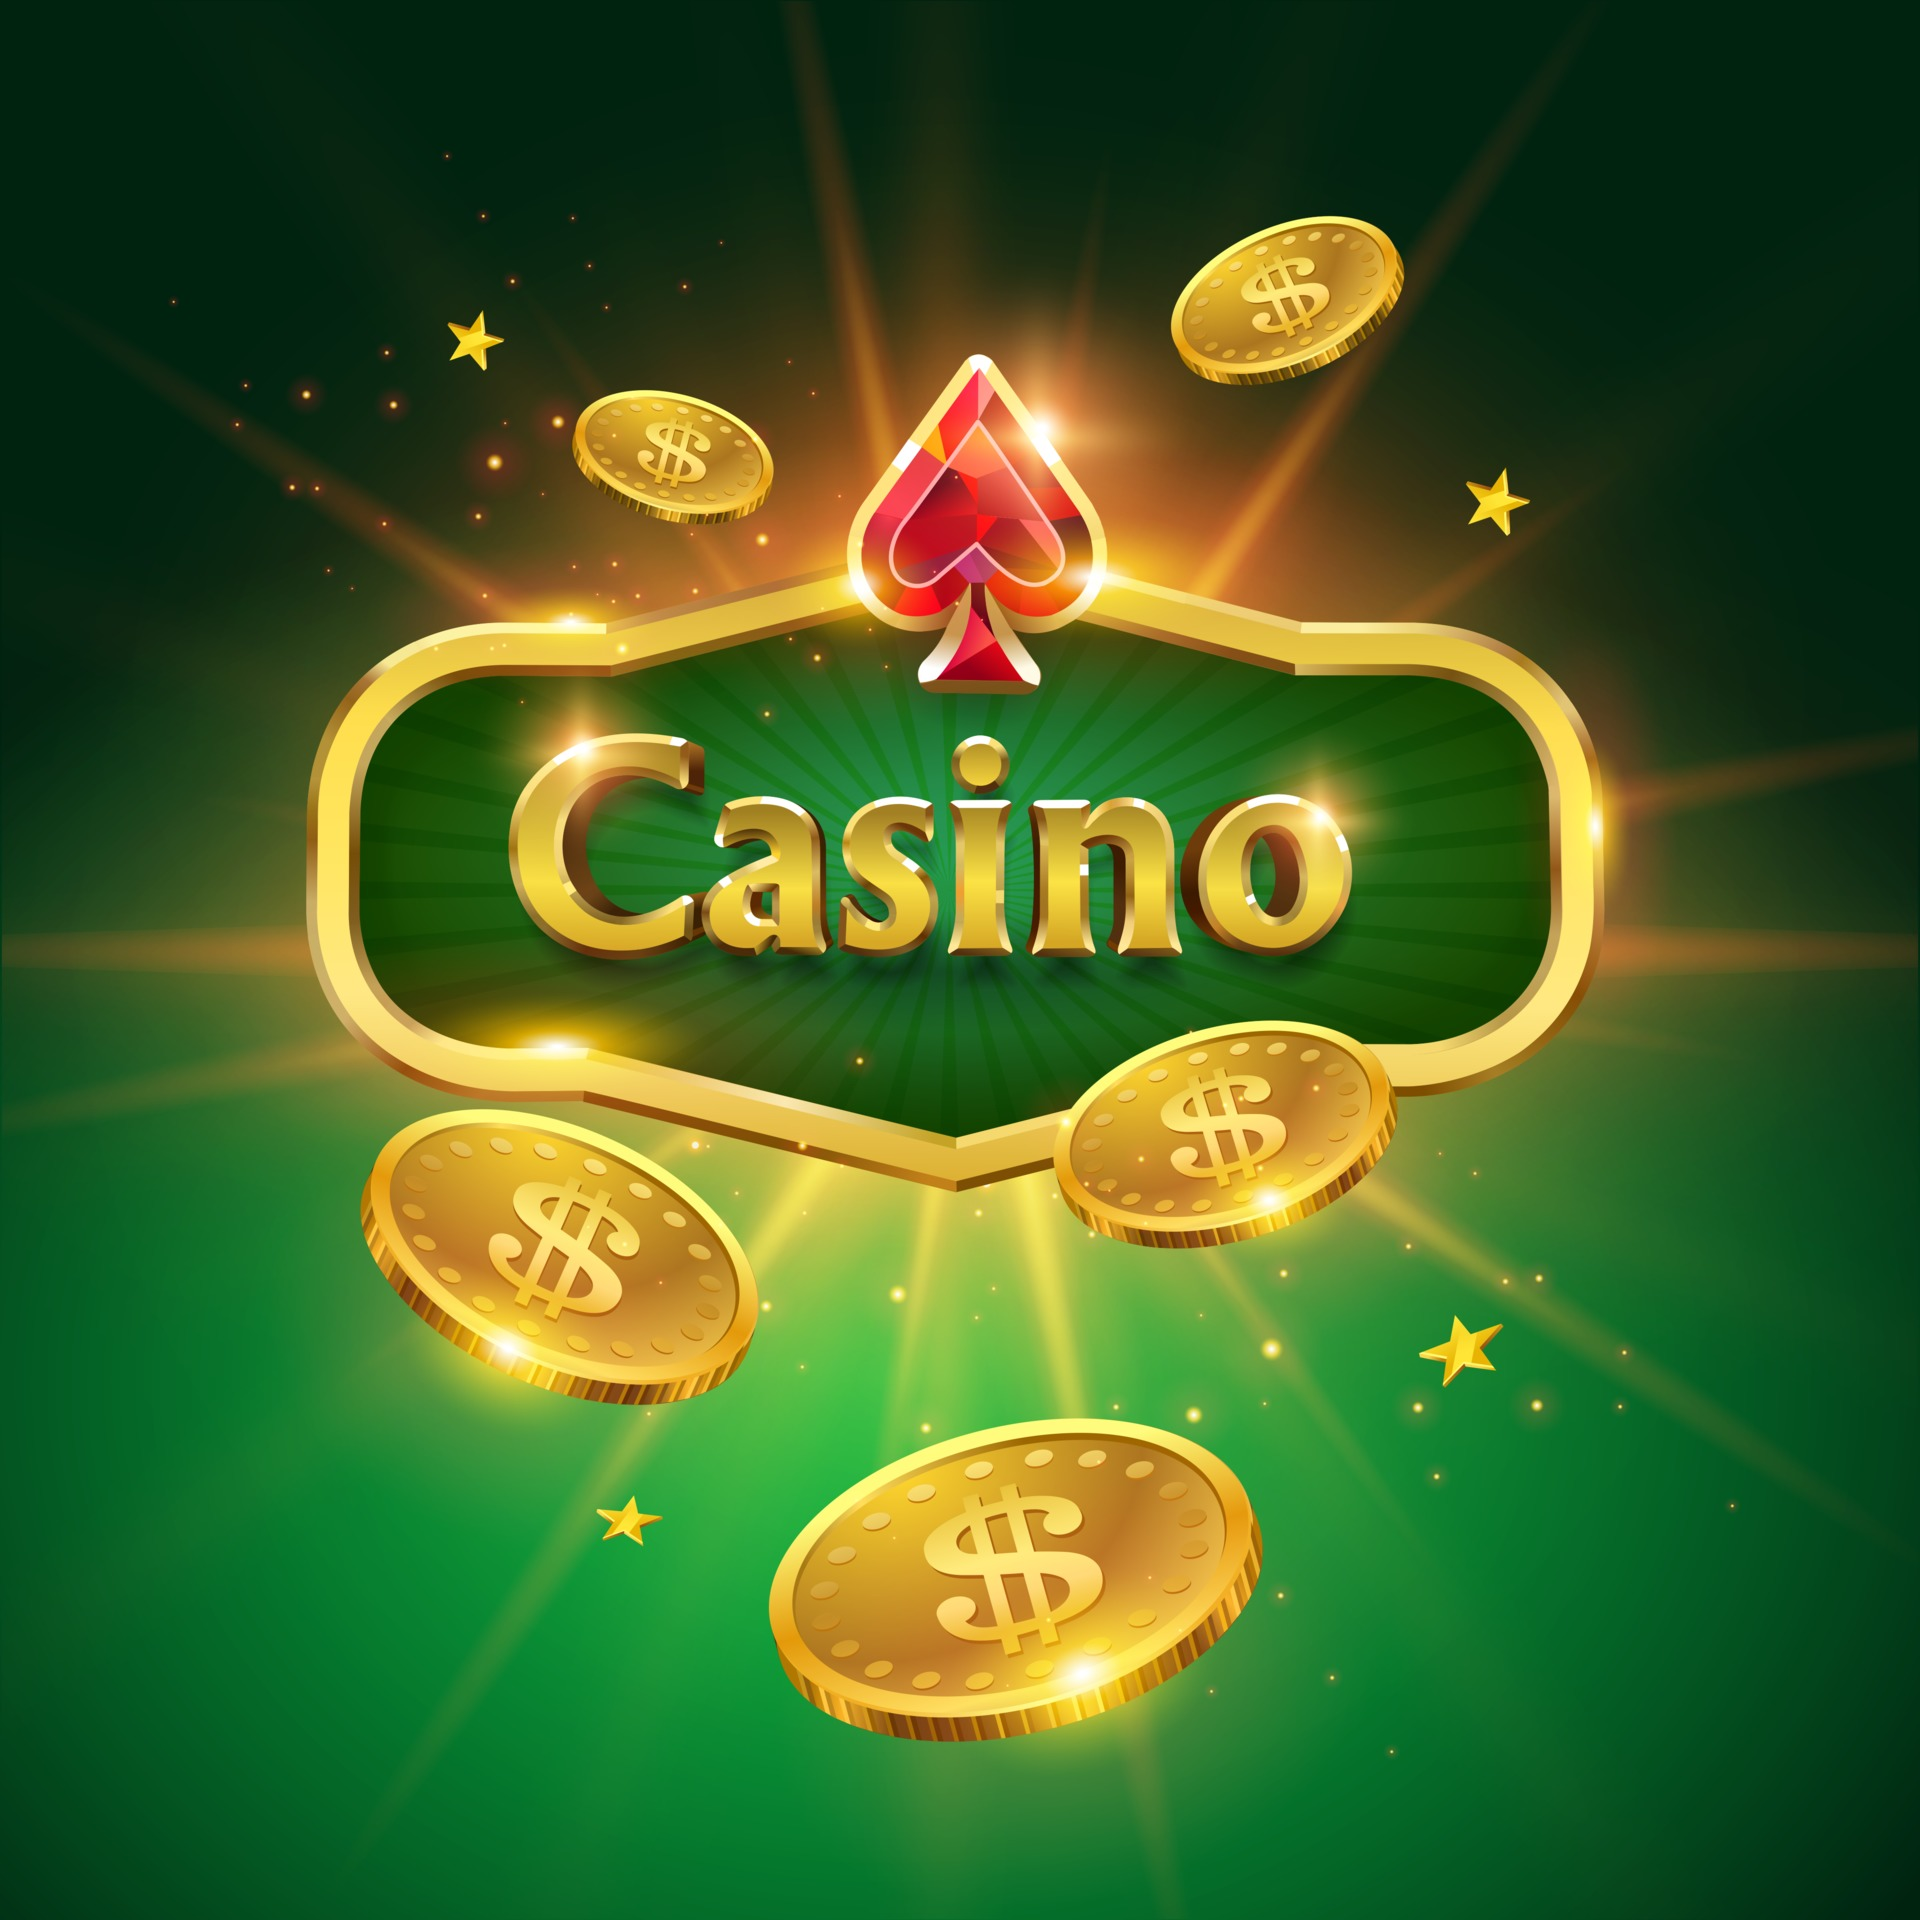 Read our 21 Casino review